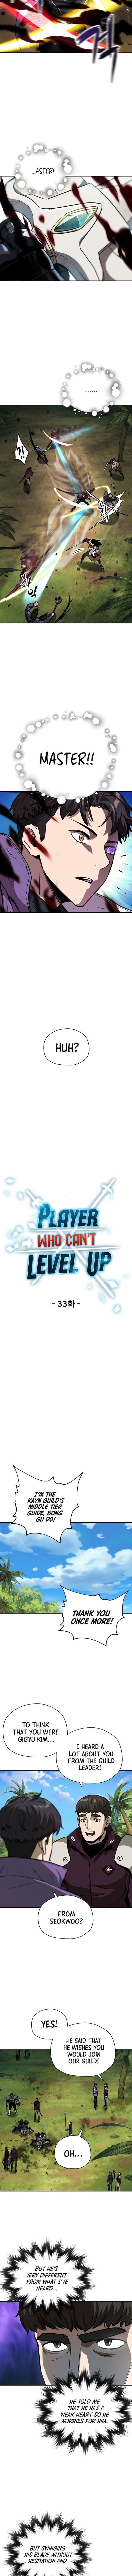 The Player that can’t Level Up Chapter 33 - Page 3